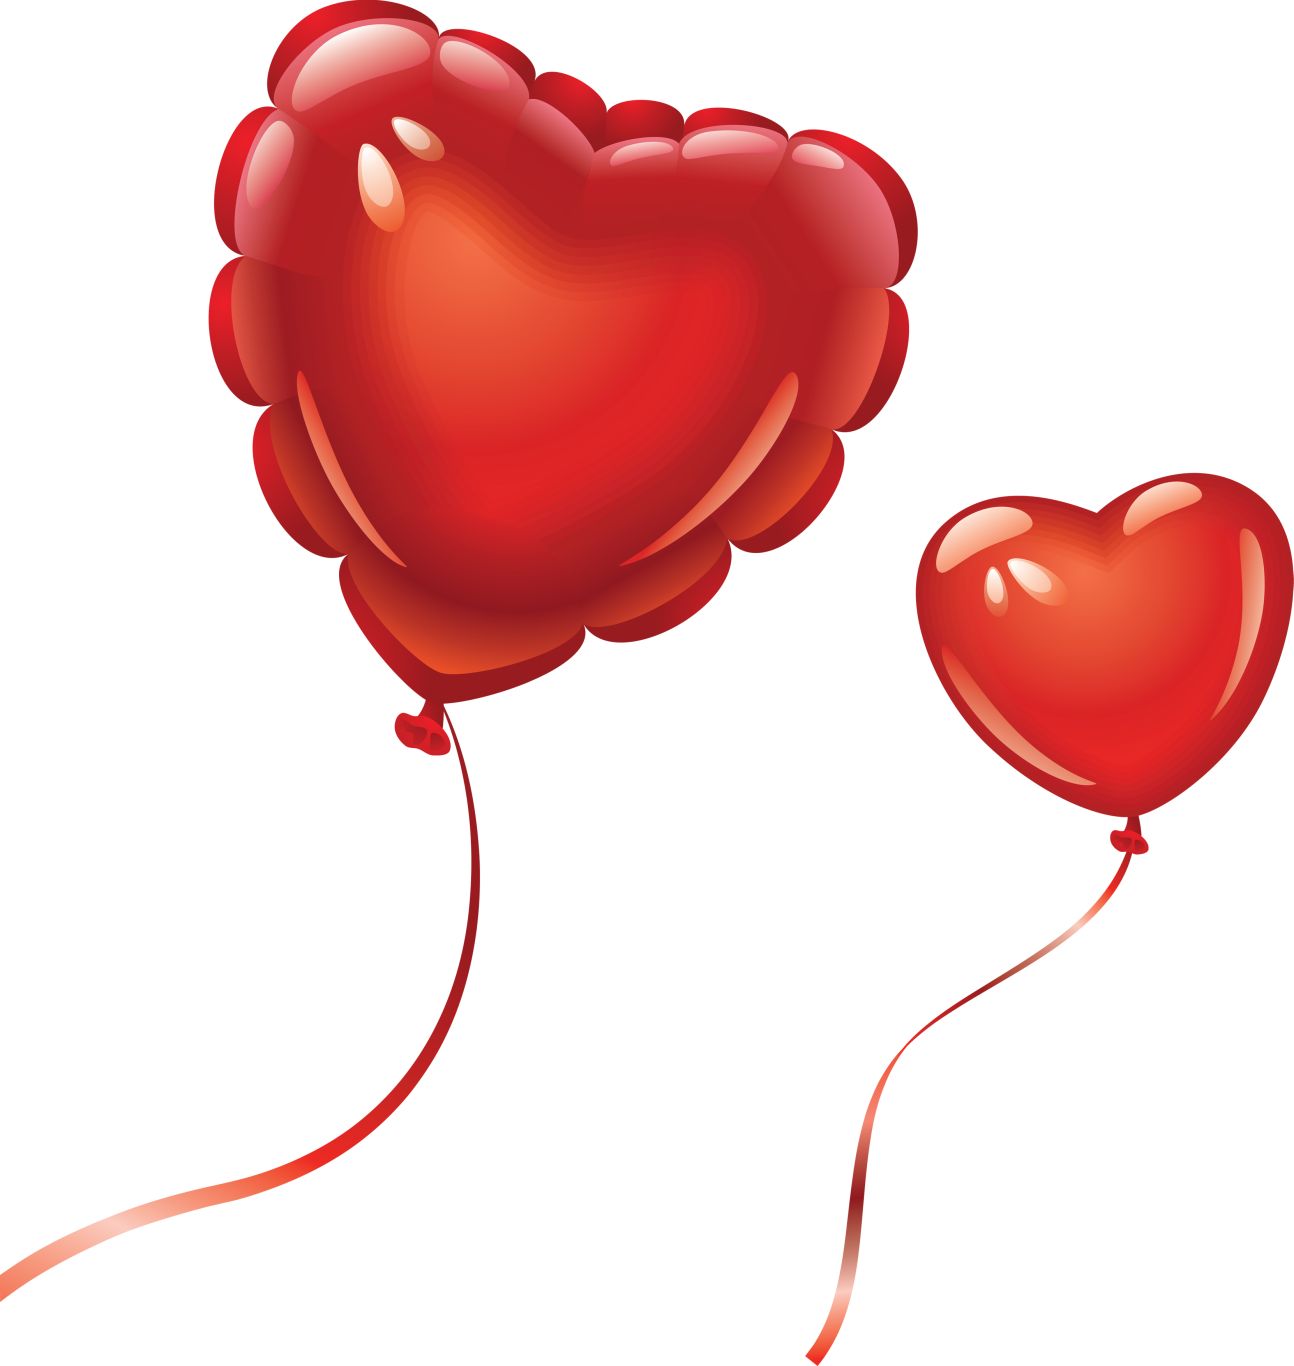 Heart balloon PNG image, free download, heart balloons    图片编号:3398